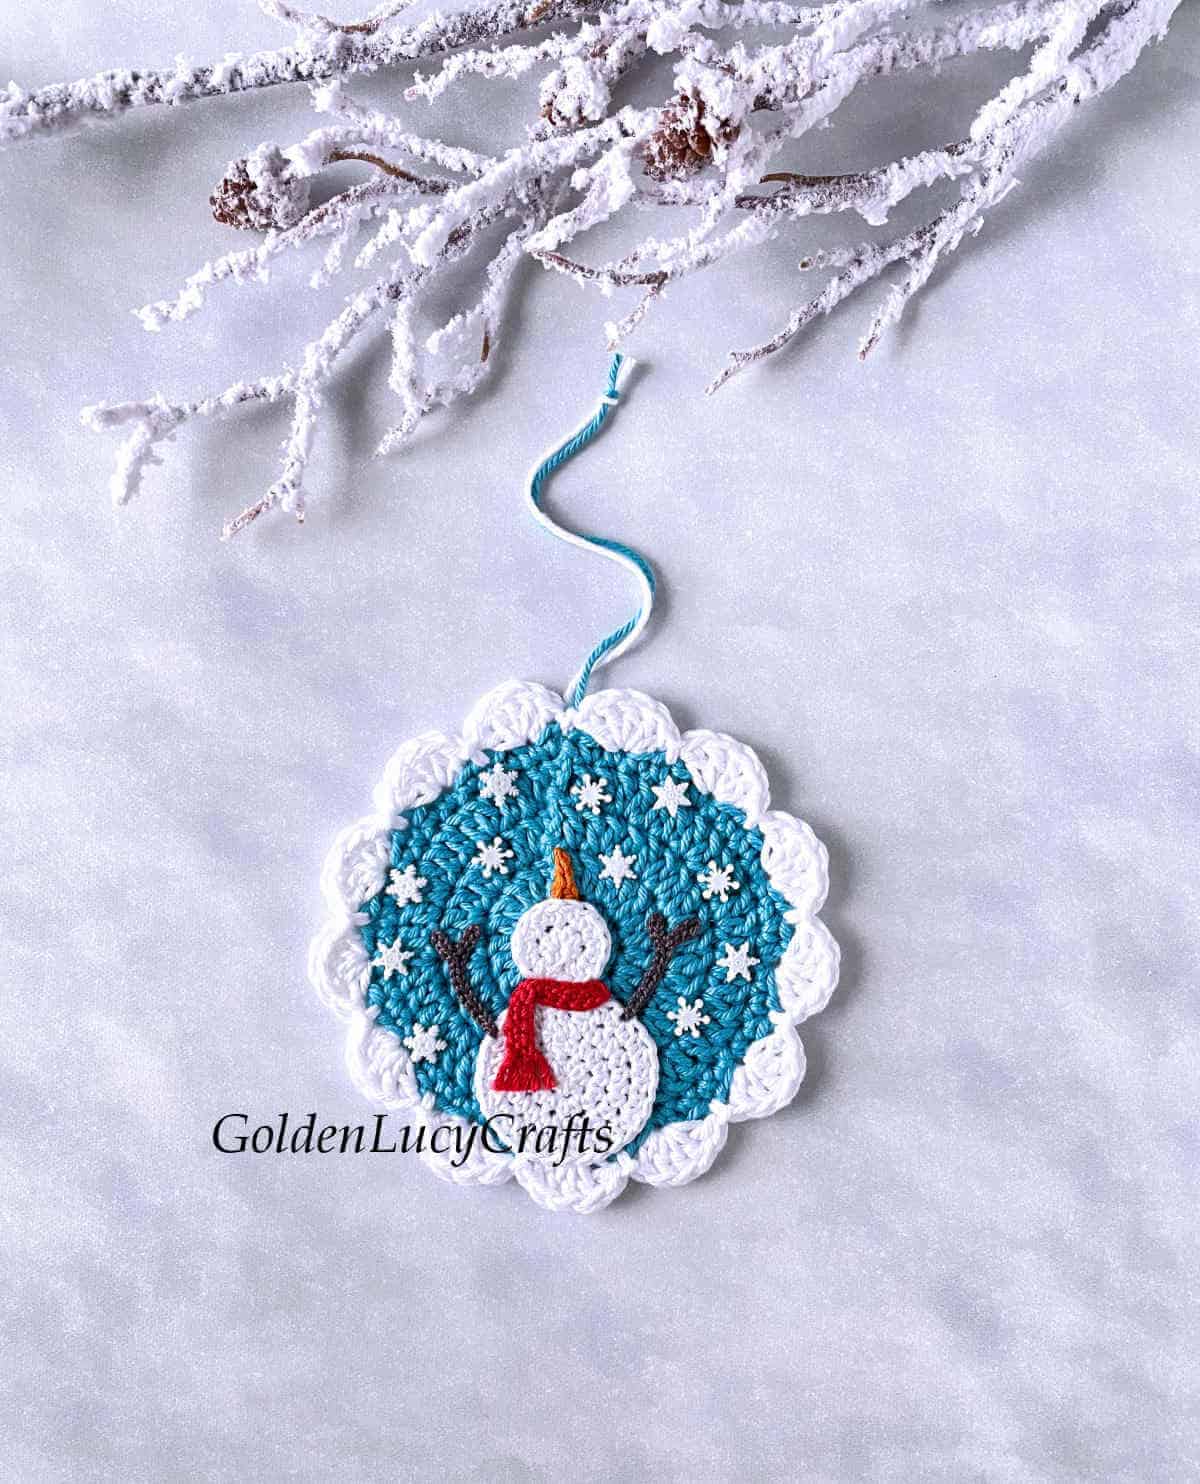 Crochet winter-themed ornament with snowman catching snowflakes on it.